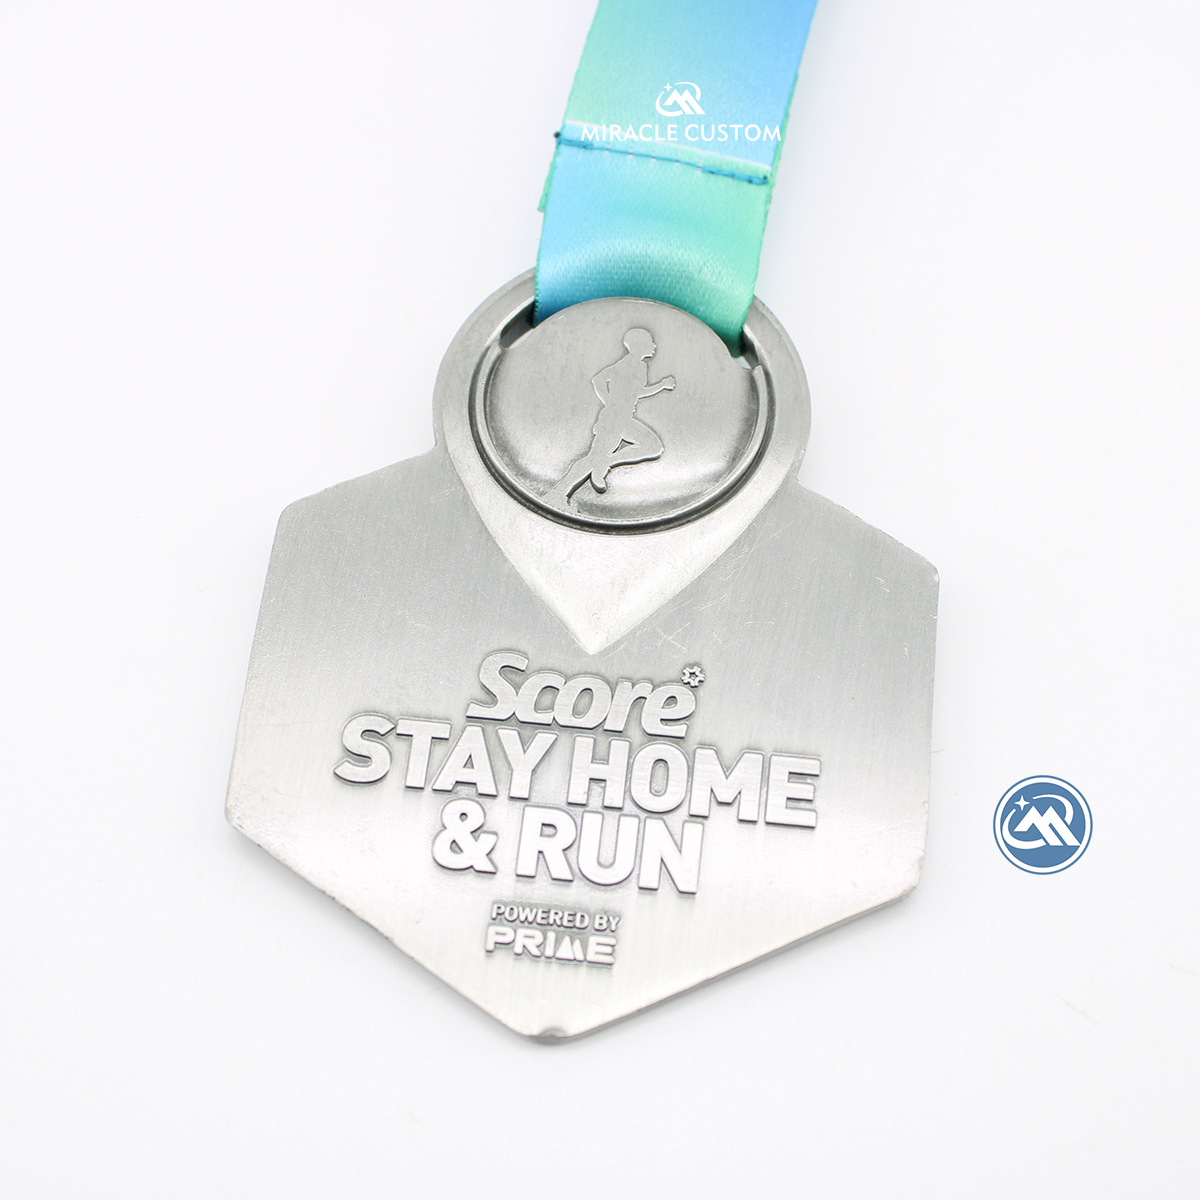 Custom SCORE Stay Home and Run 5K Challenge Medals